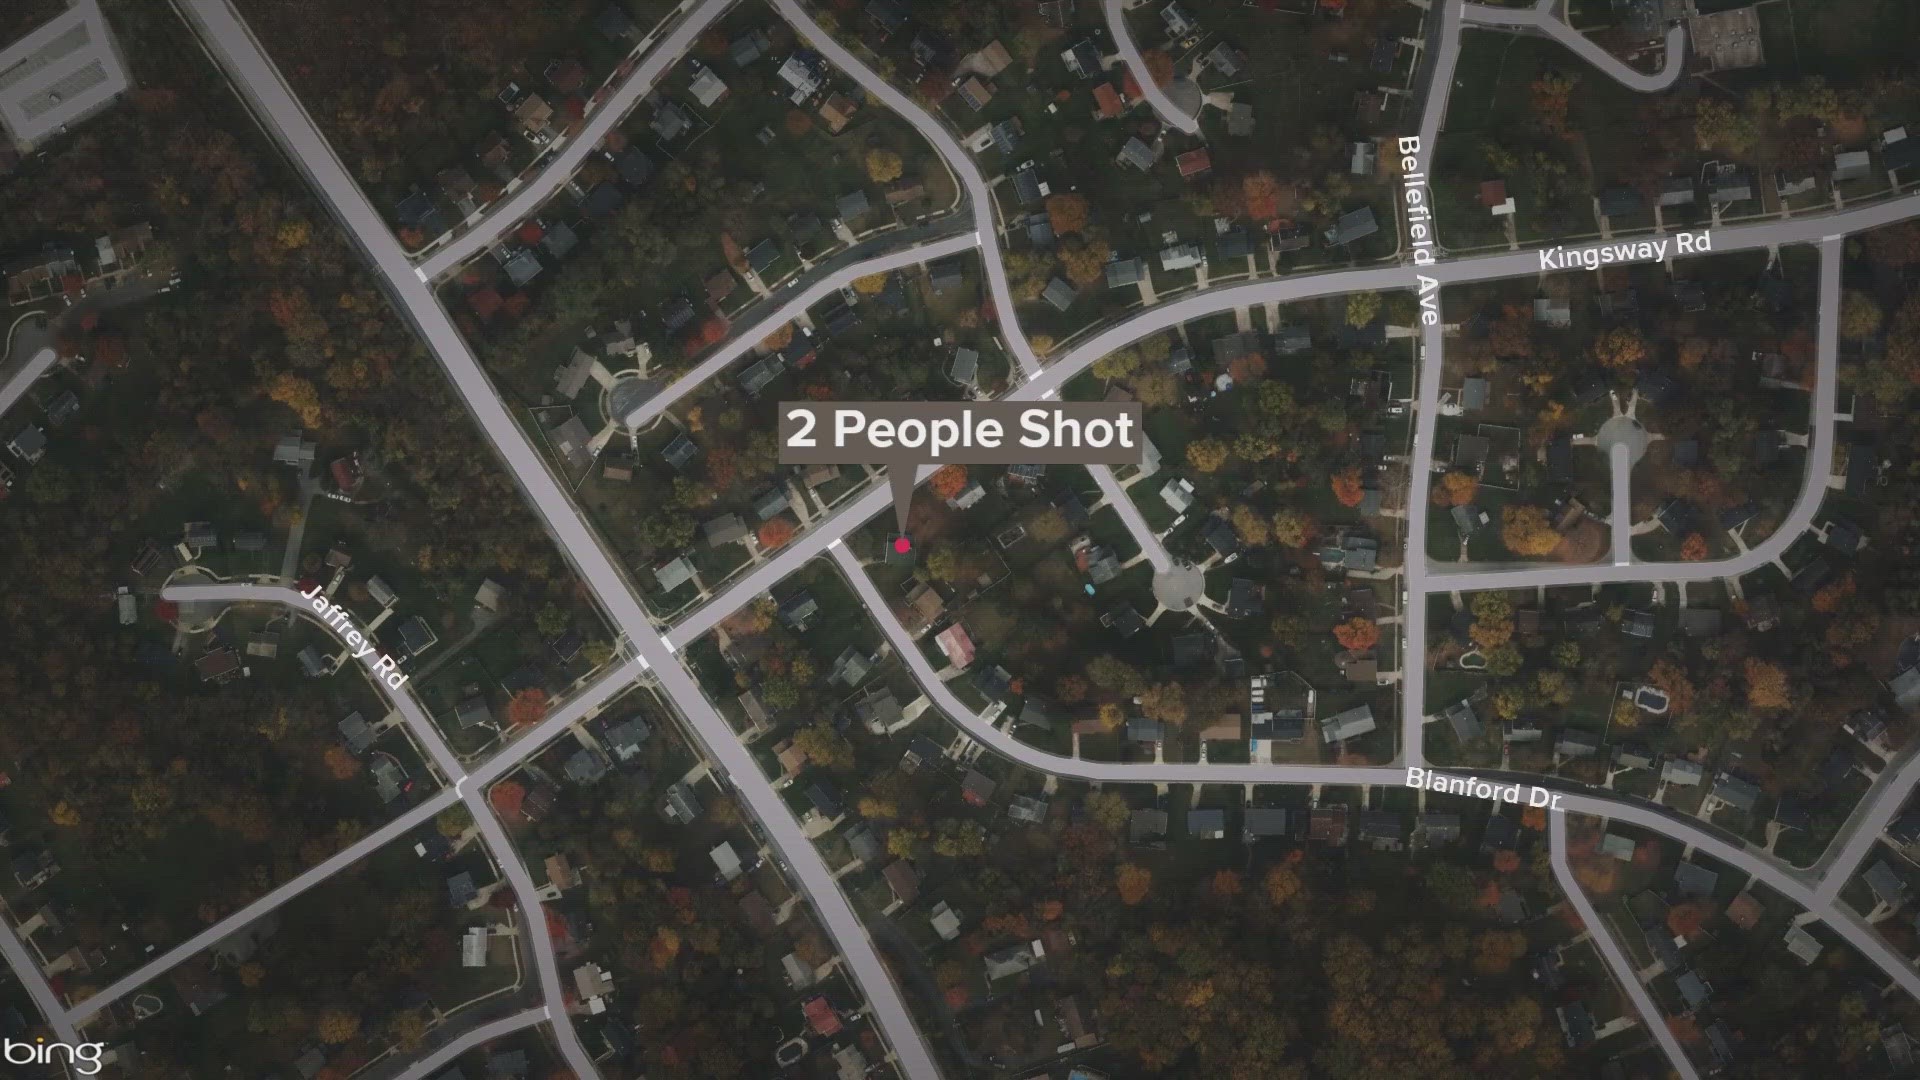 The location of this shooting is just five minutes away from the deadly shooting that happened at 3:50 a.m. Monday on Blanford Drive in Fort Washington.